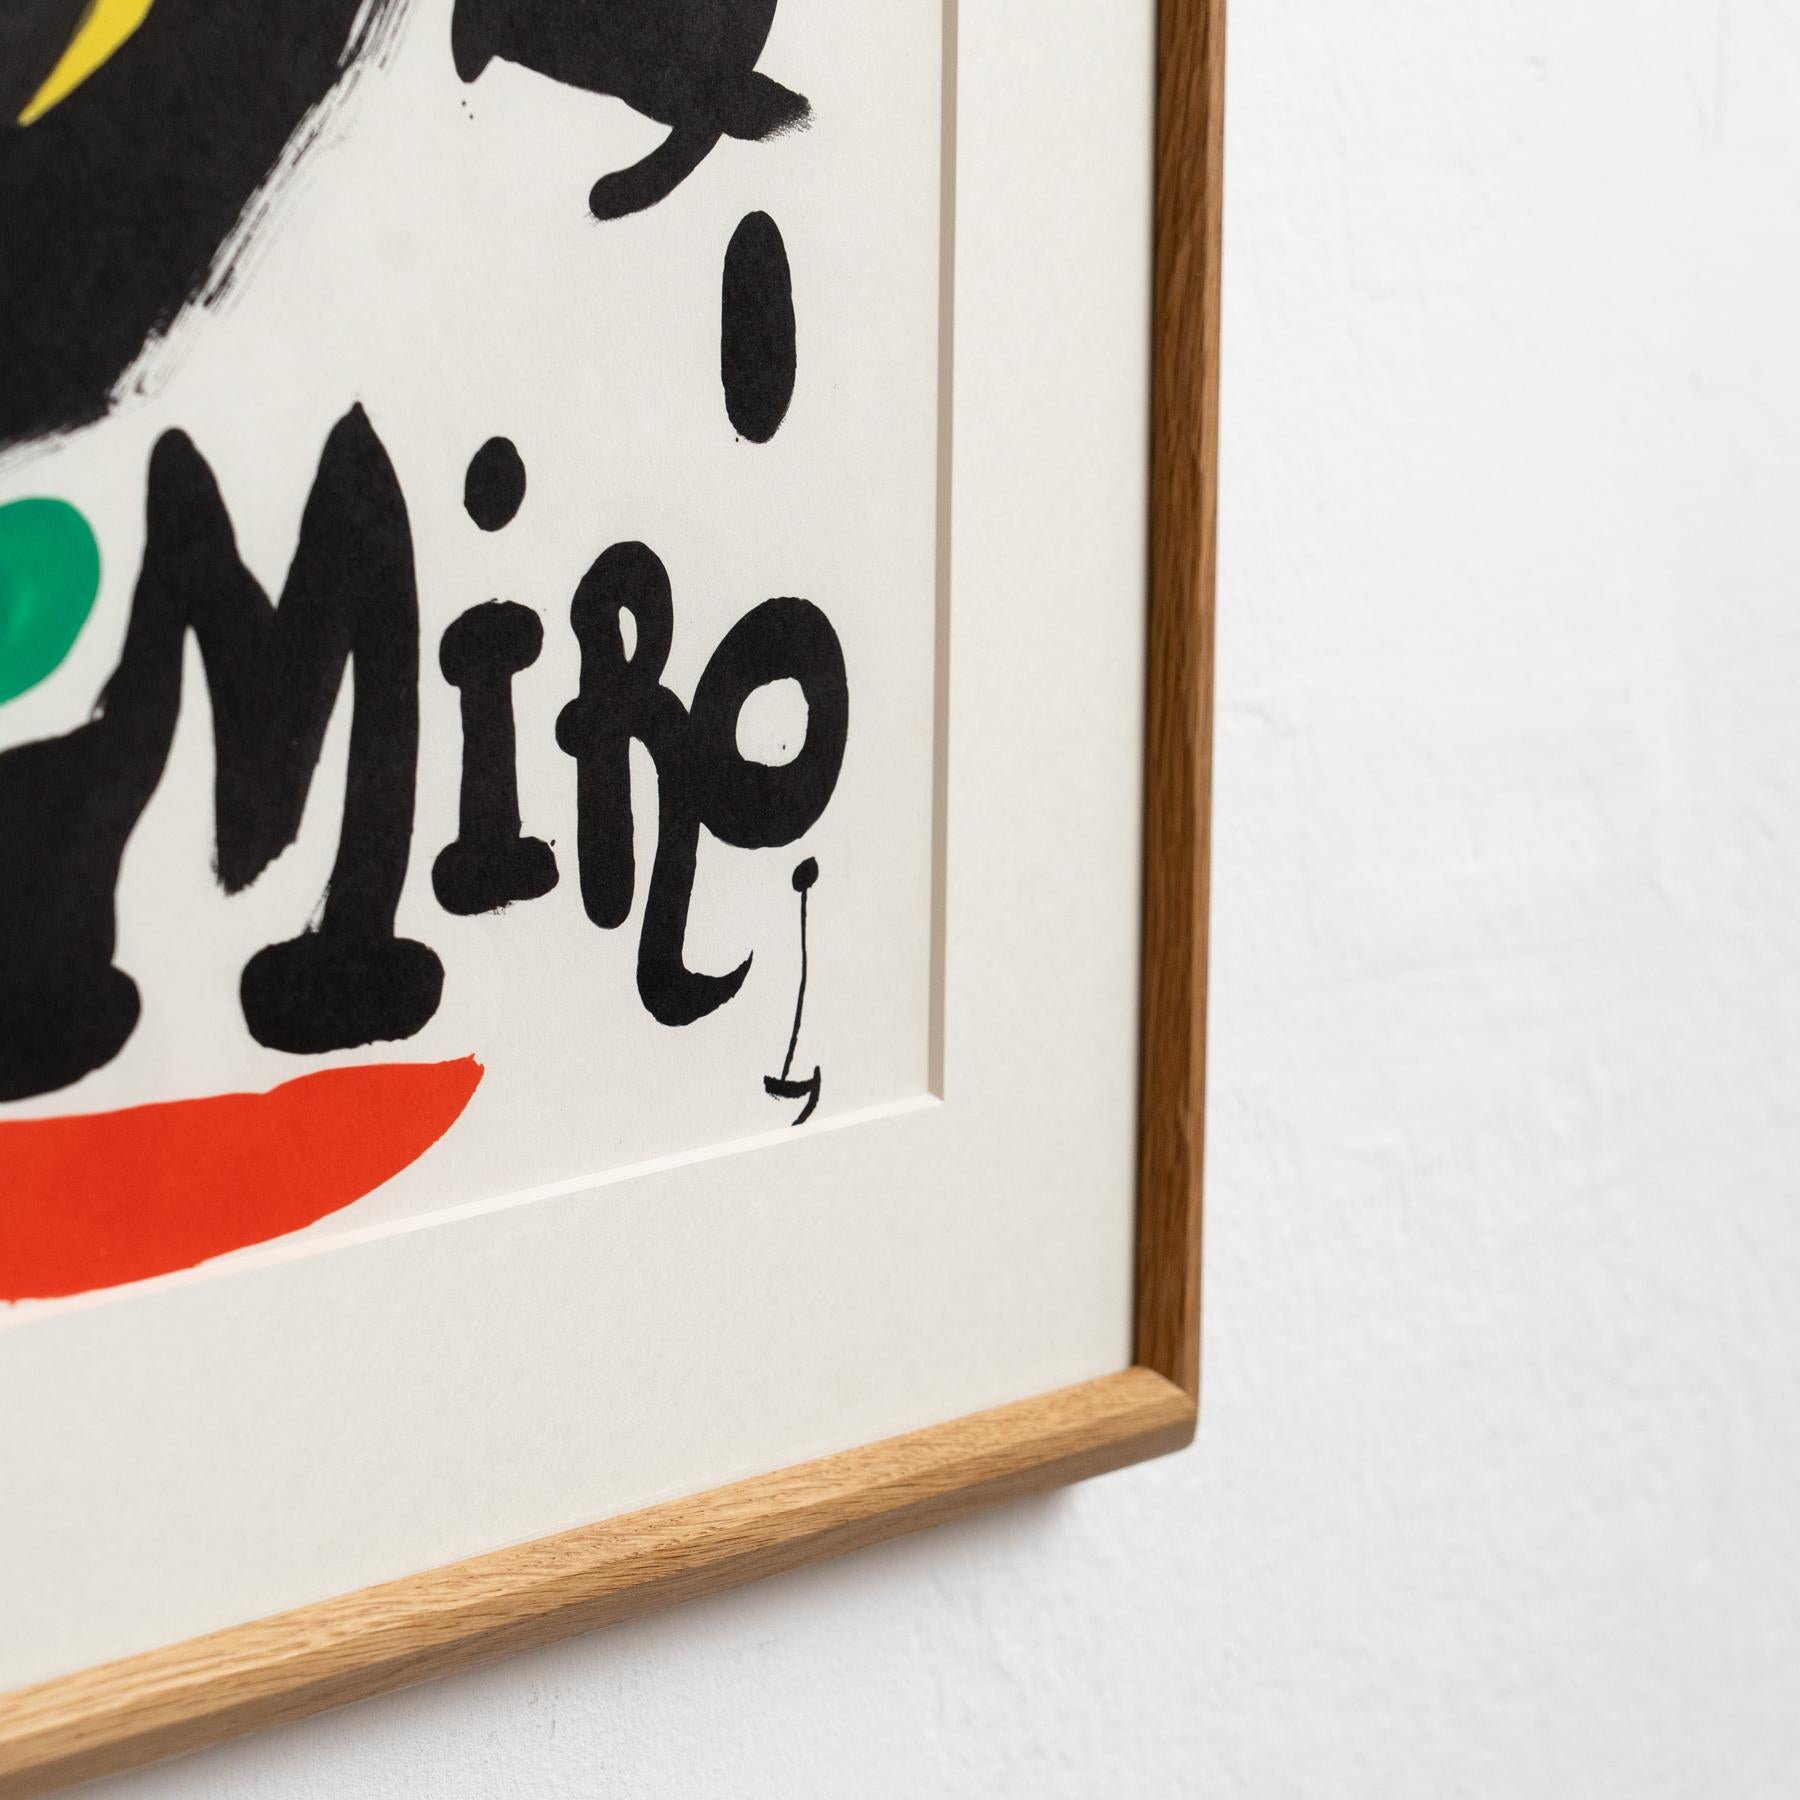 Paper  High Quality Fine Art Color Framed Lithography by Joan Miró, circa 1960. For Sale